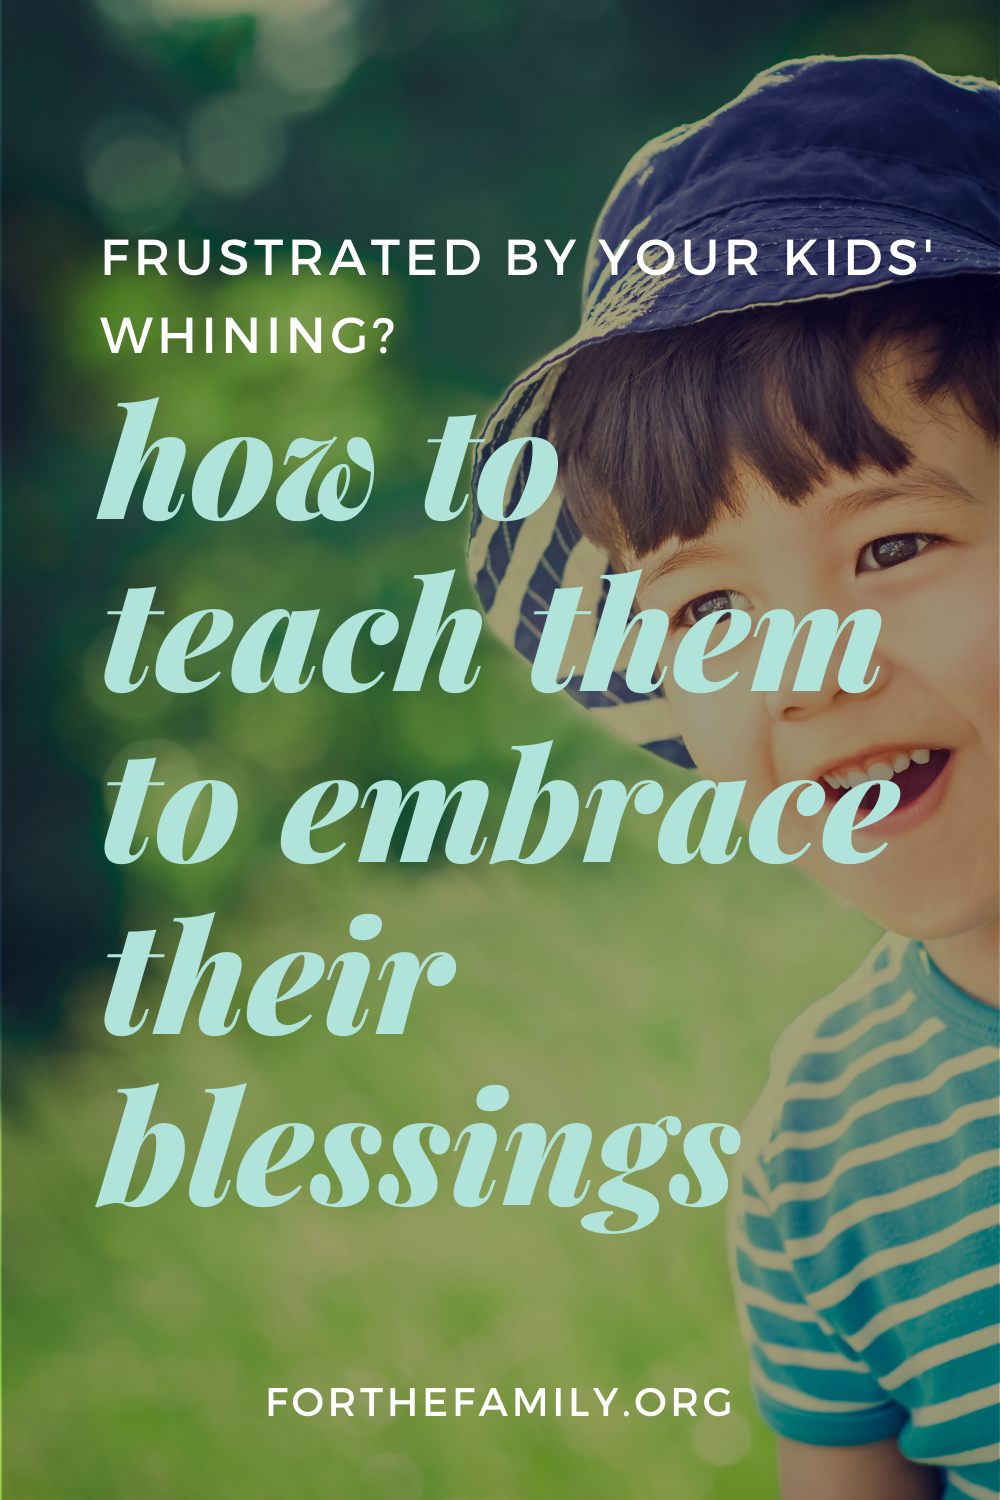 Frustrated By Your Kids’ Whining? How to Teach Them to Embrace Their Blessings